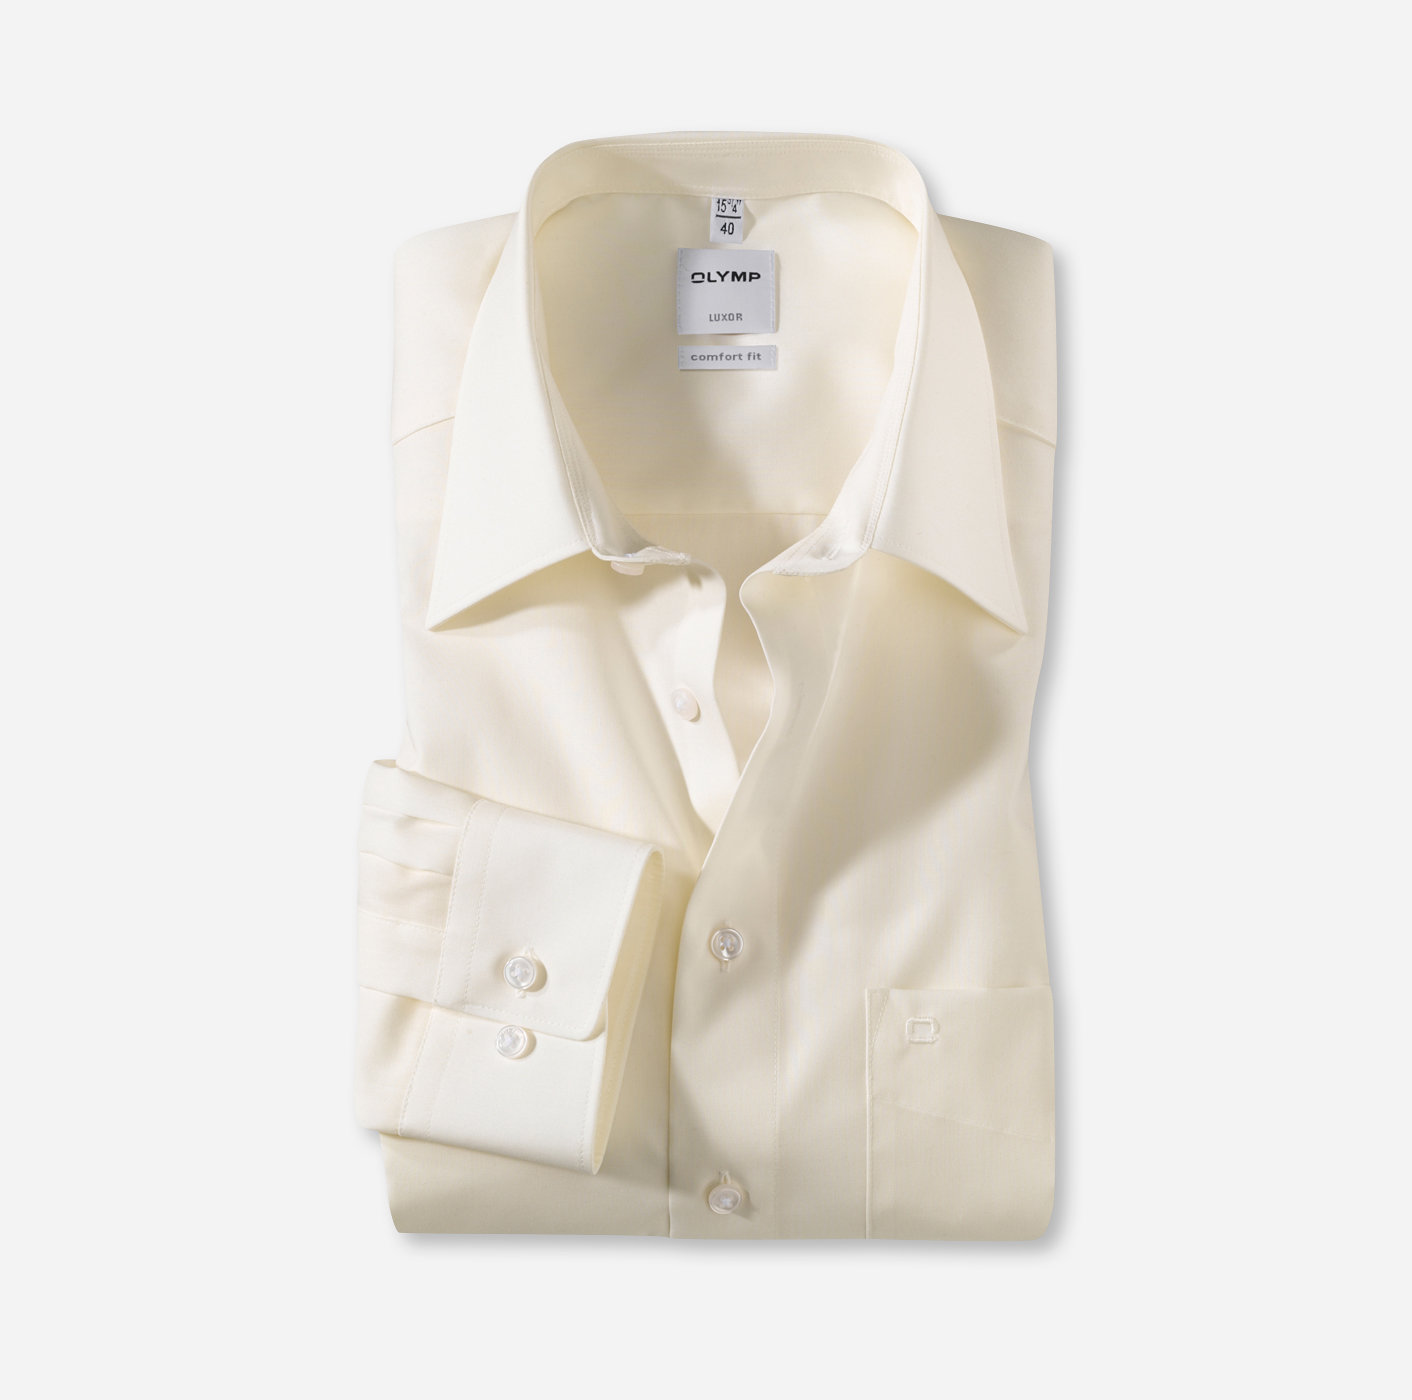 OLYMP Luxor, comfort fit, Business shirt, Manches extra longues, Kent, Beige